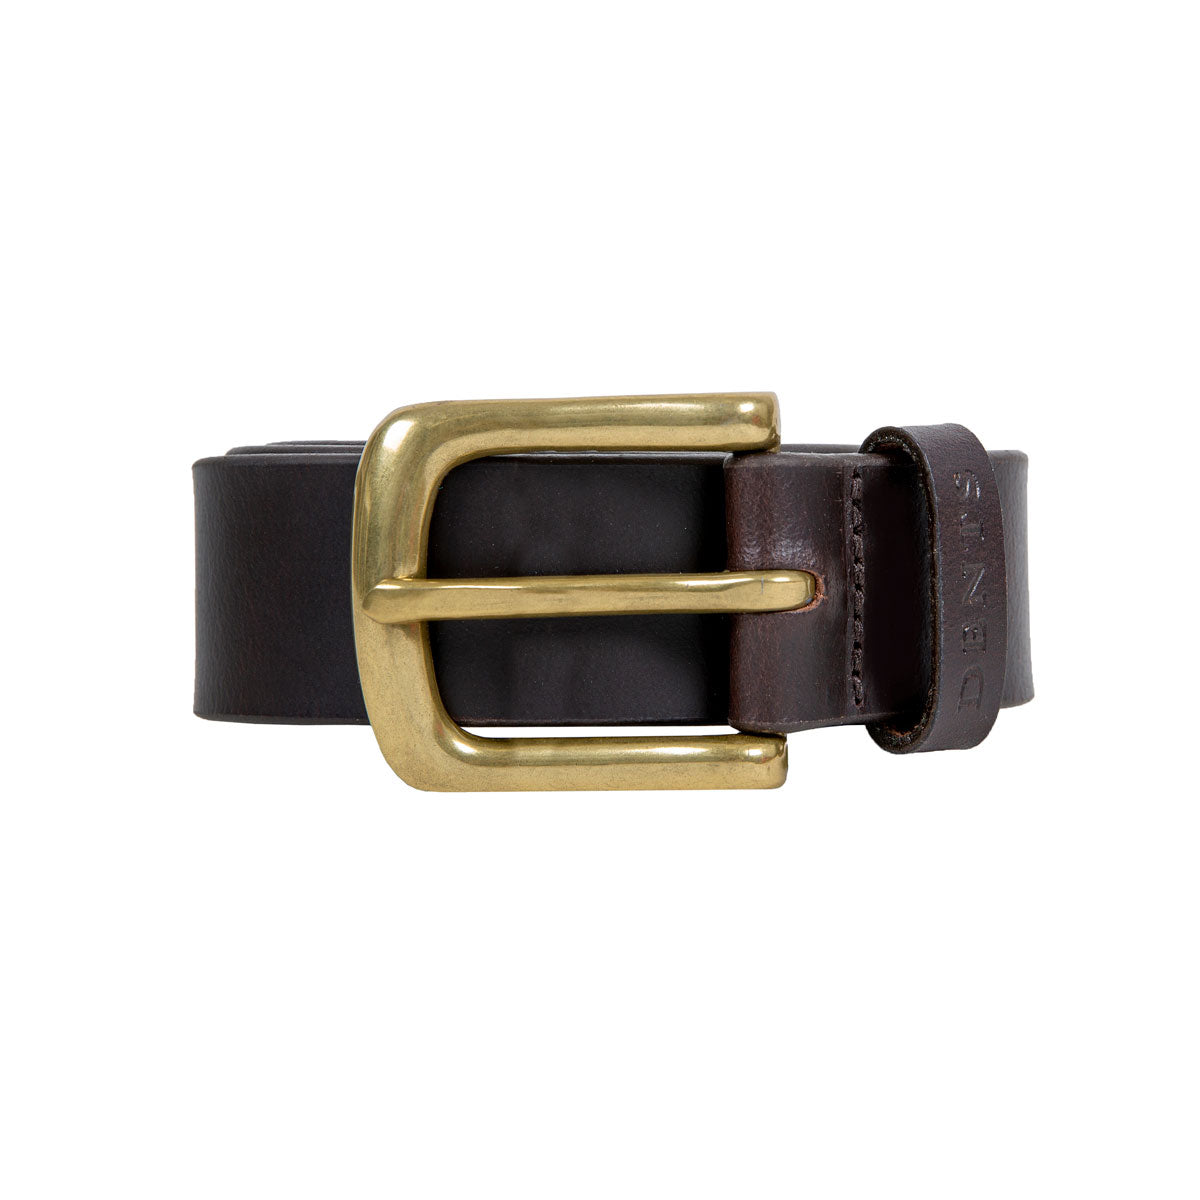 Men's smooth leather belt in brown